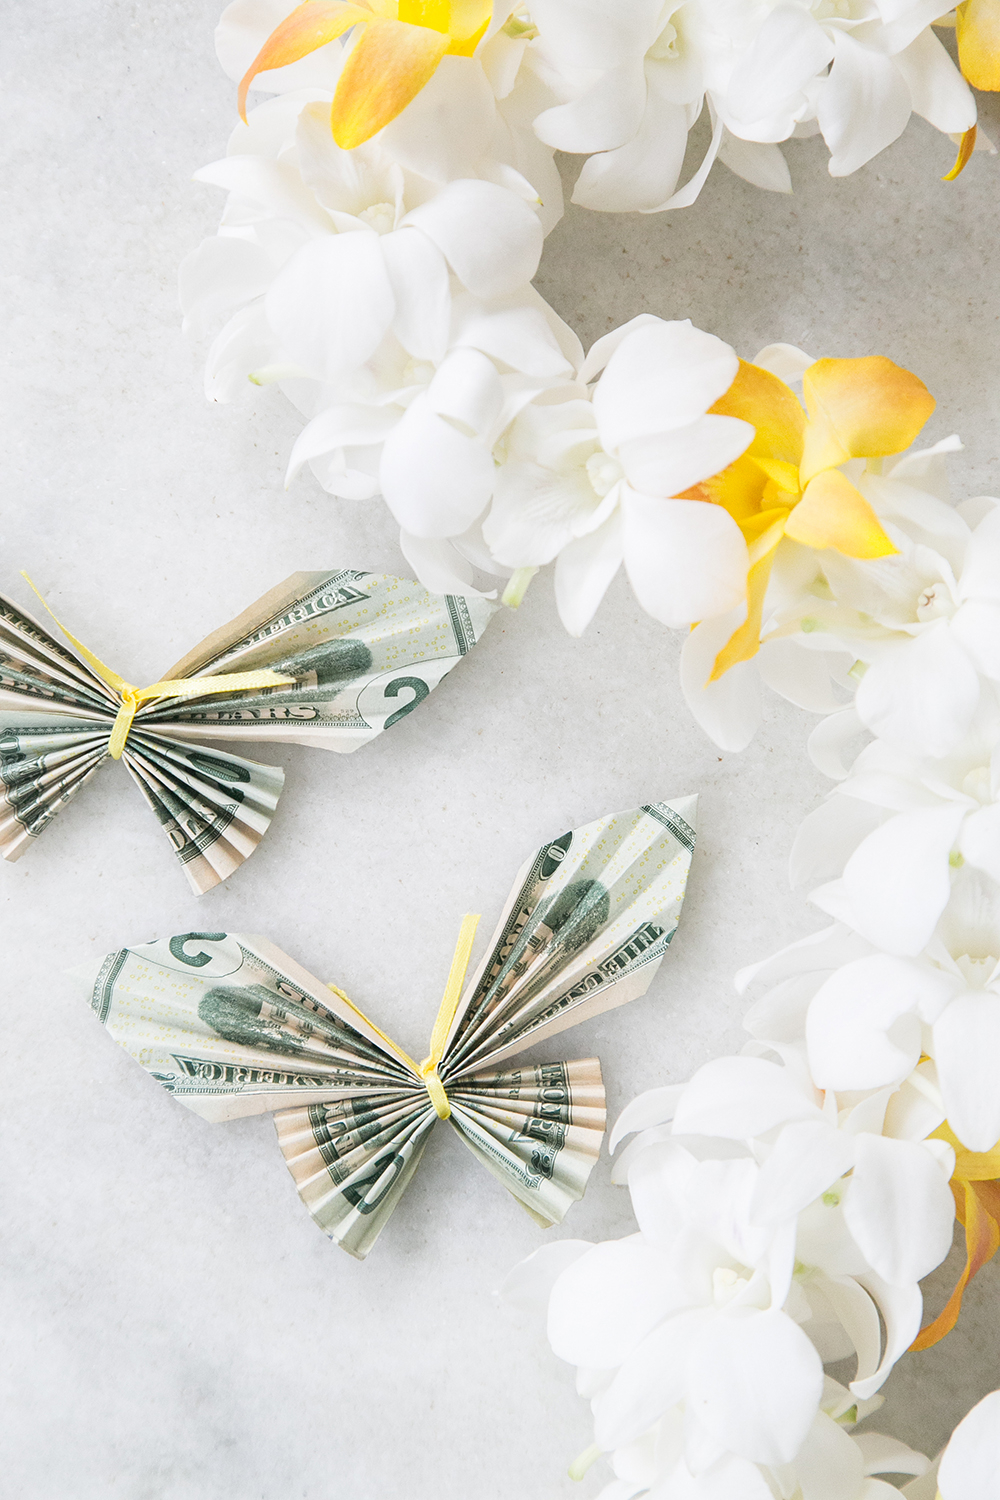 How To Make Origami Money Lei Money Origami Butterfly Lei For Graduation Sugar And Charm